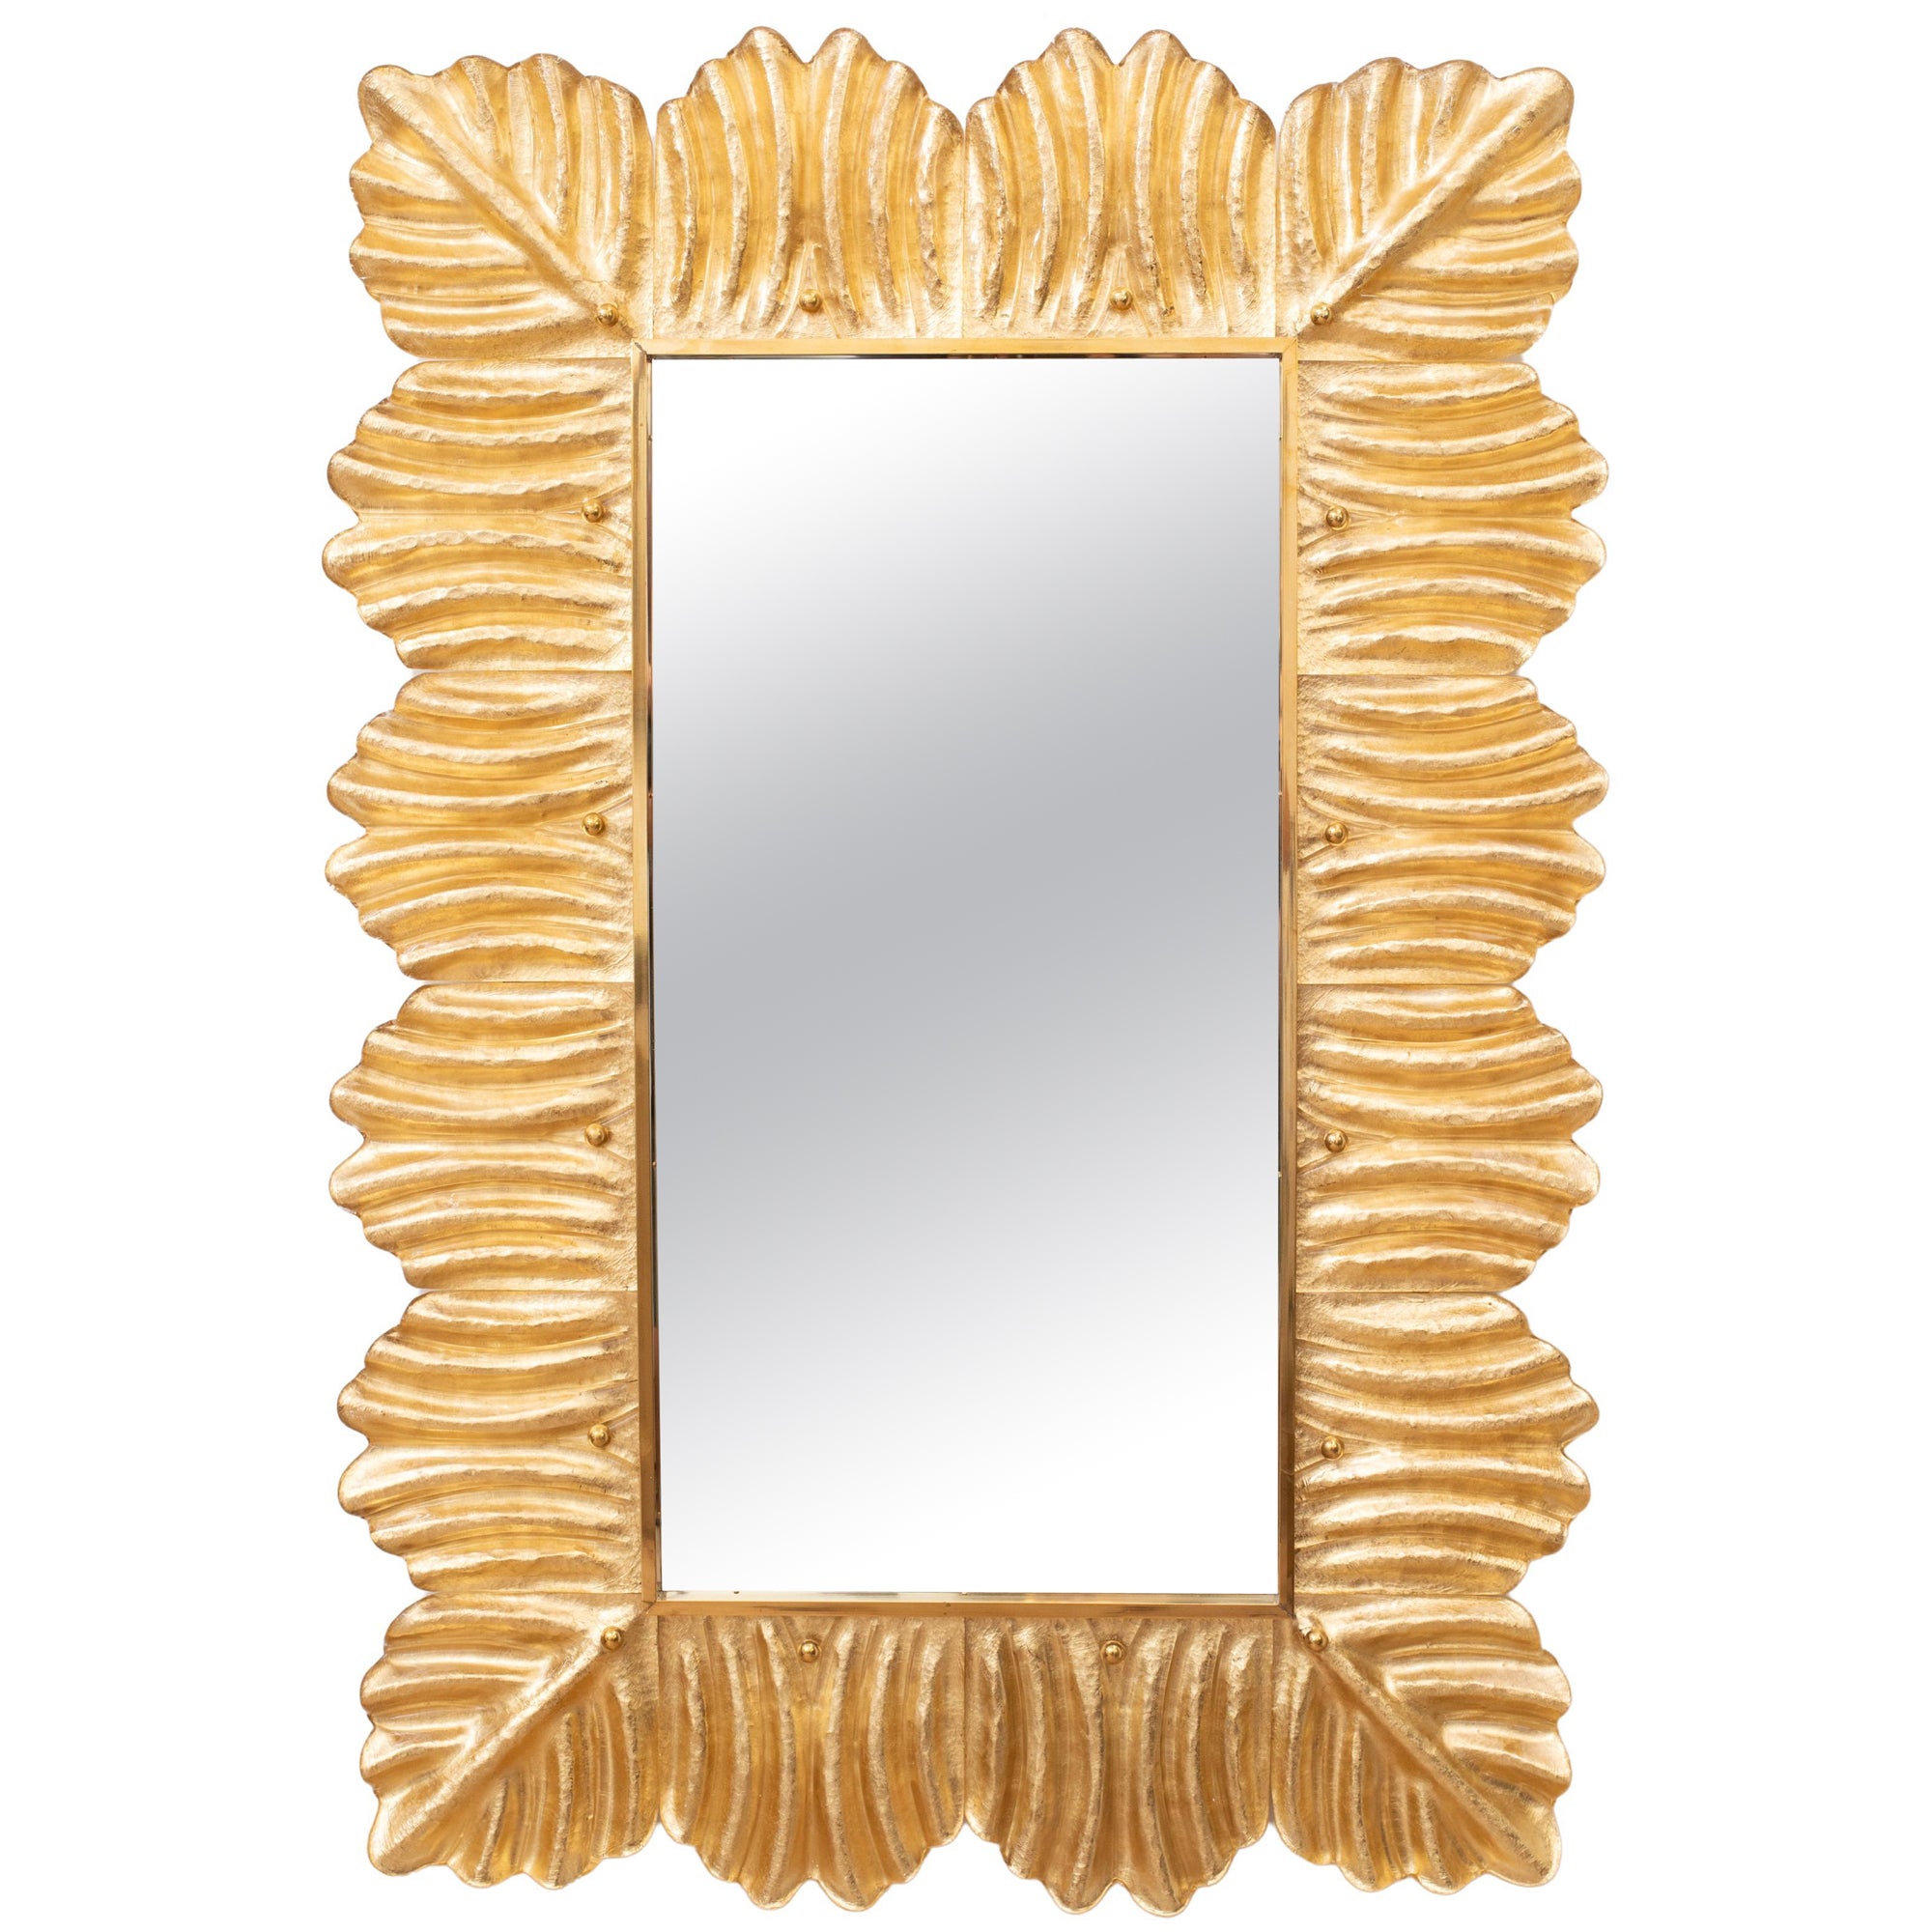 Barocco style Gilded Leaf Murano Glass Mirror, in stock